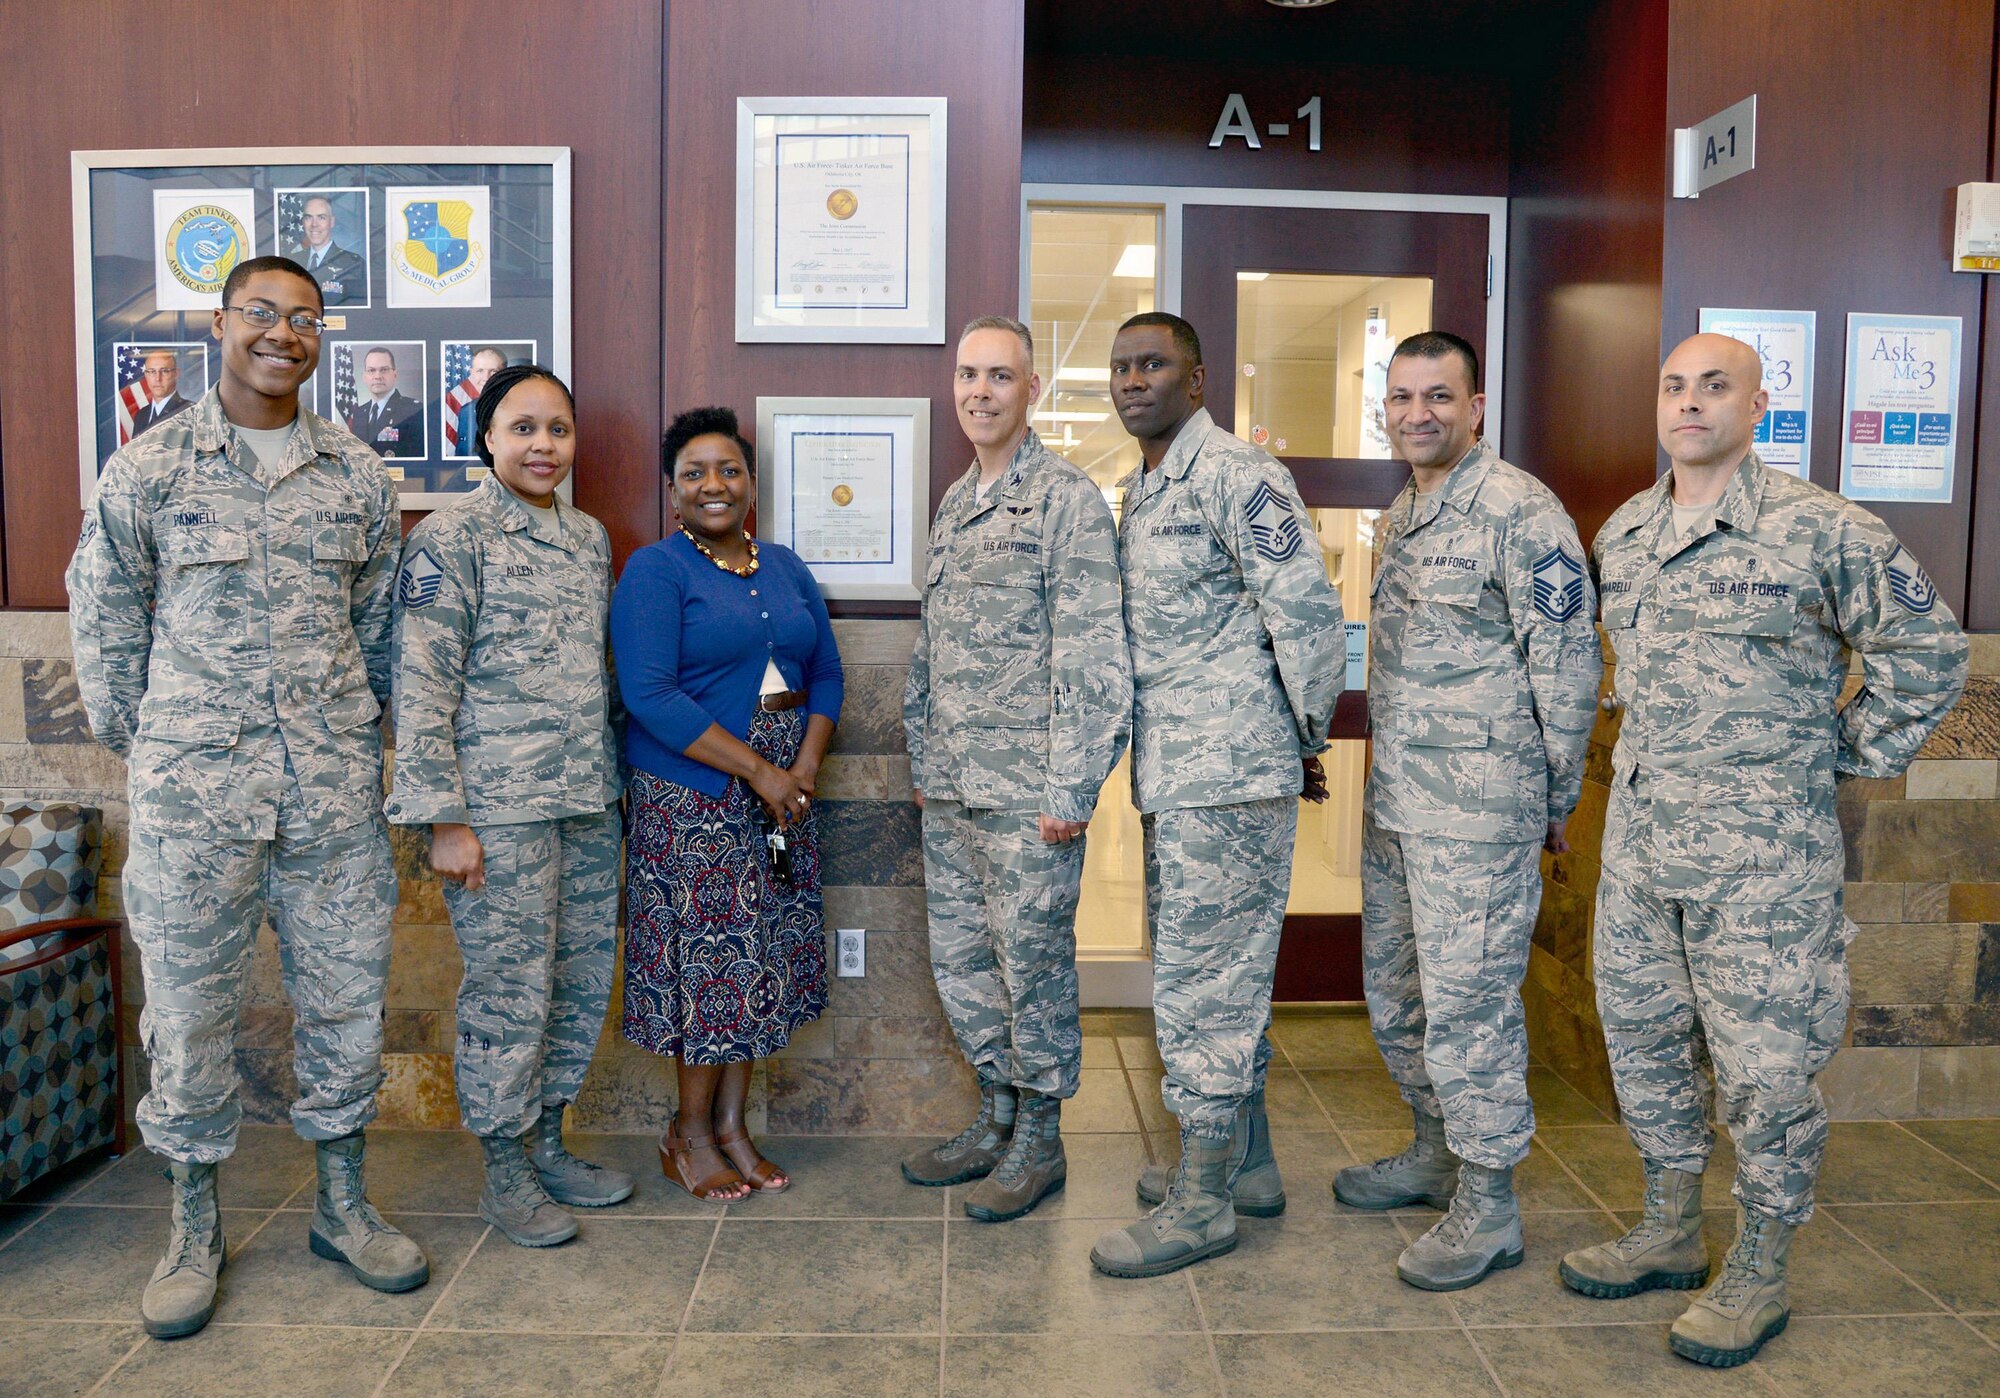 Airman 1st Class Jason Pannell, with the 72nd Medical Support Squadron; Master Sgt. Nonika Allen, with the 72nd Dental Squadron; Michaelle Gordon, Clinical Care and Risk Management officer; 72nd Medical Group Commander Col. Christopher Grussendorf; Chief Master Sgt. Paul Thomas, 72nd MDG superintendent; Senior Master Sgt. Manny Suprai, with the 72nd Medical Operations Squadron and Master Sgt. Brian Yannarelli, with the 72nd MDSS, surround a new certificate which hangs in the front lobby of the Tinker Clinic. The certificate is from The Joint commission, bestowing a three-year accreditation to the 72nd Medical Group by meeting the requirements for the Ambulatory Health Care Accreditation Program. Airman Pannell served as support staff during the Med Group's recent inspection; Sergeants Allen, Yannarelli and Suprai served as pre-surveyors; and Ms. Gordon led her team to the distinguished accomplishment. (Air Force photo by Kelly White)